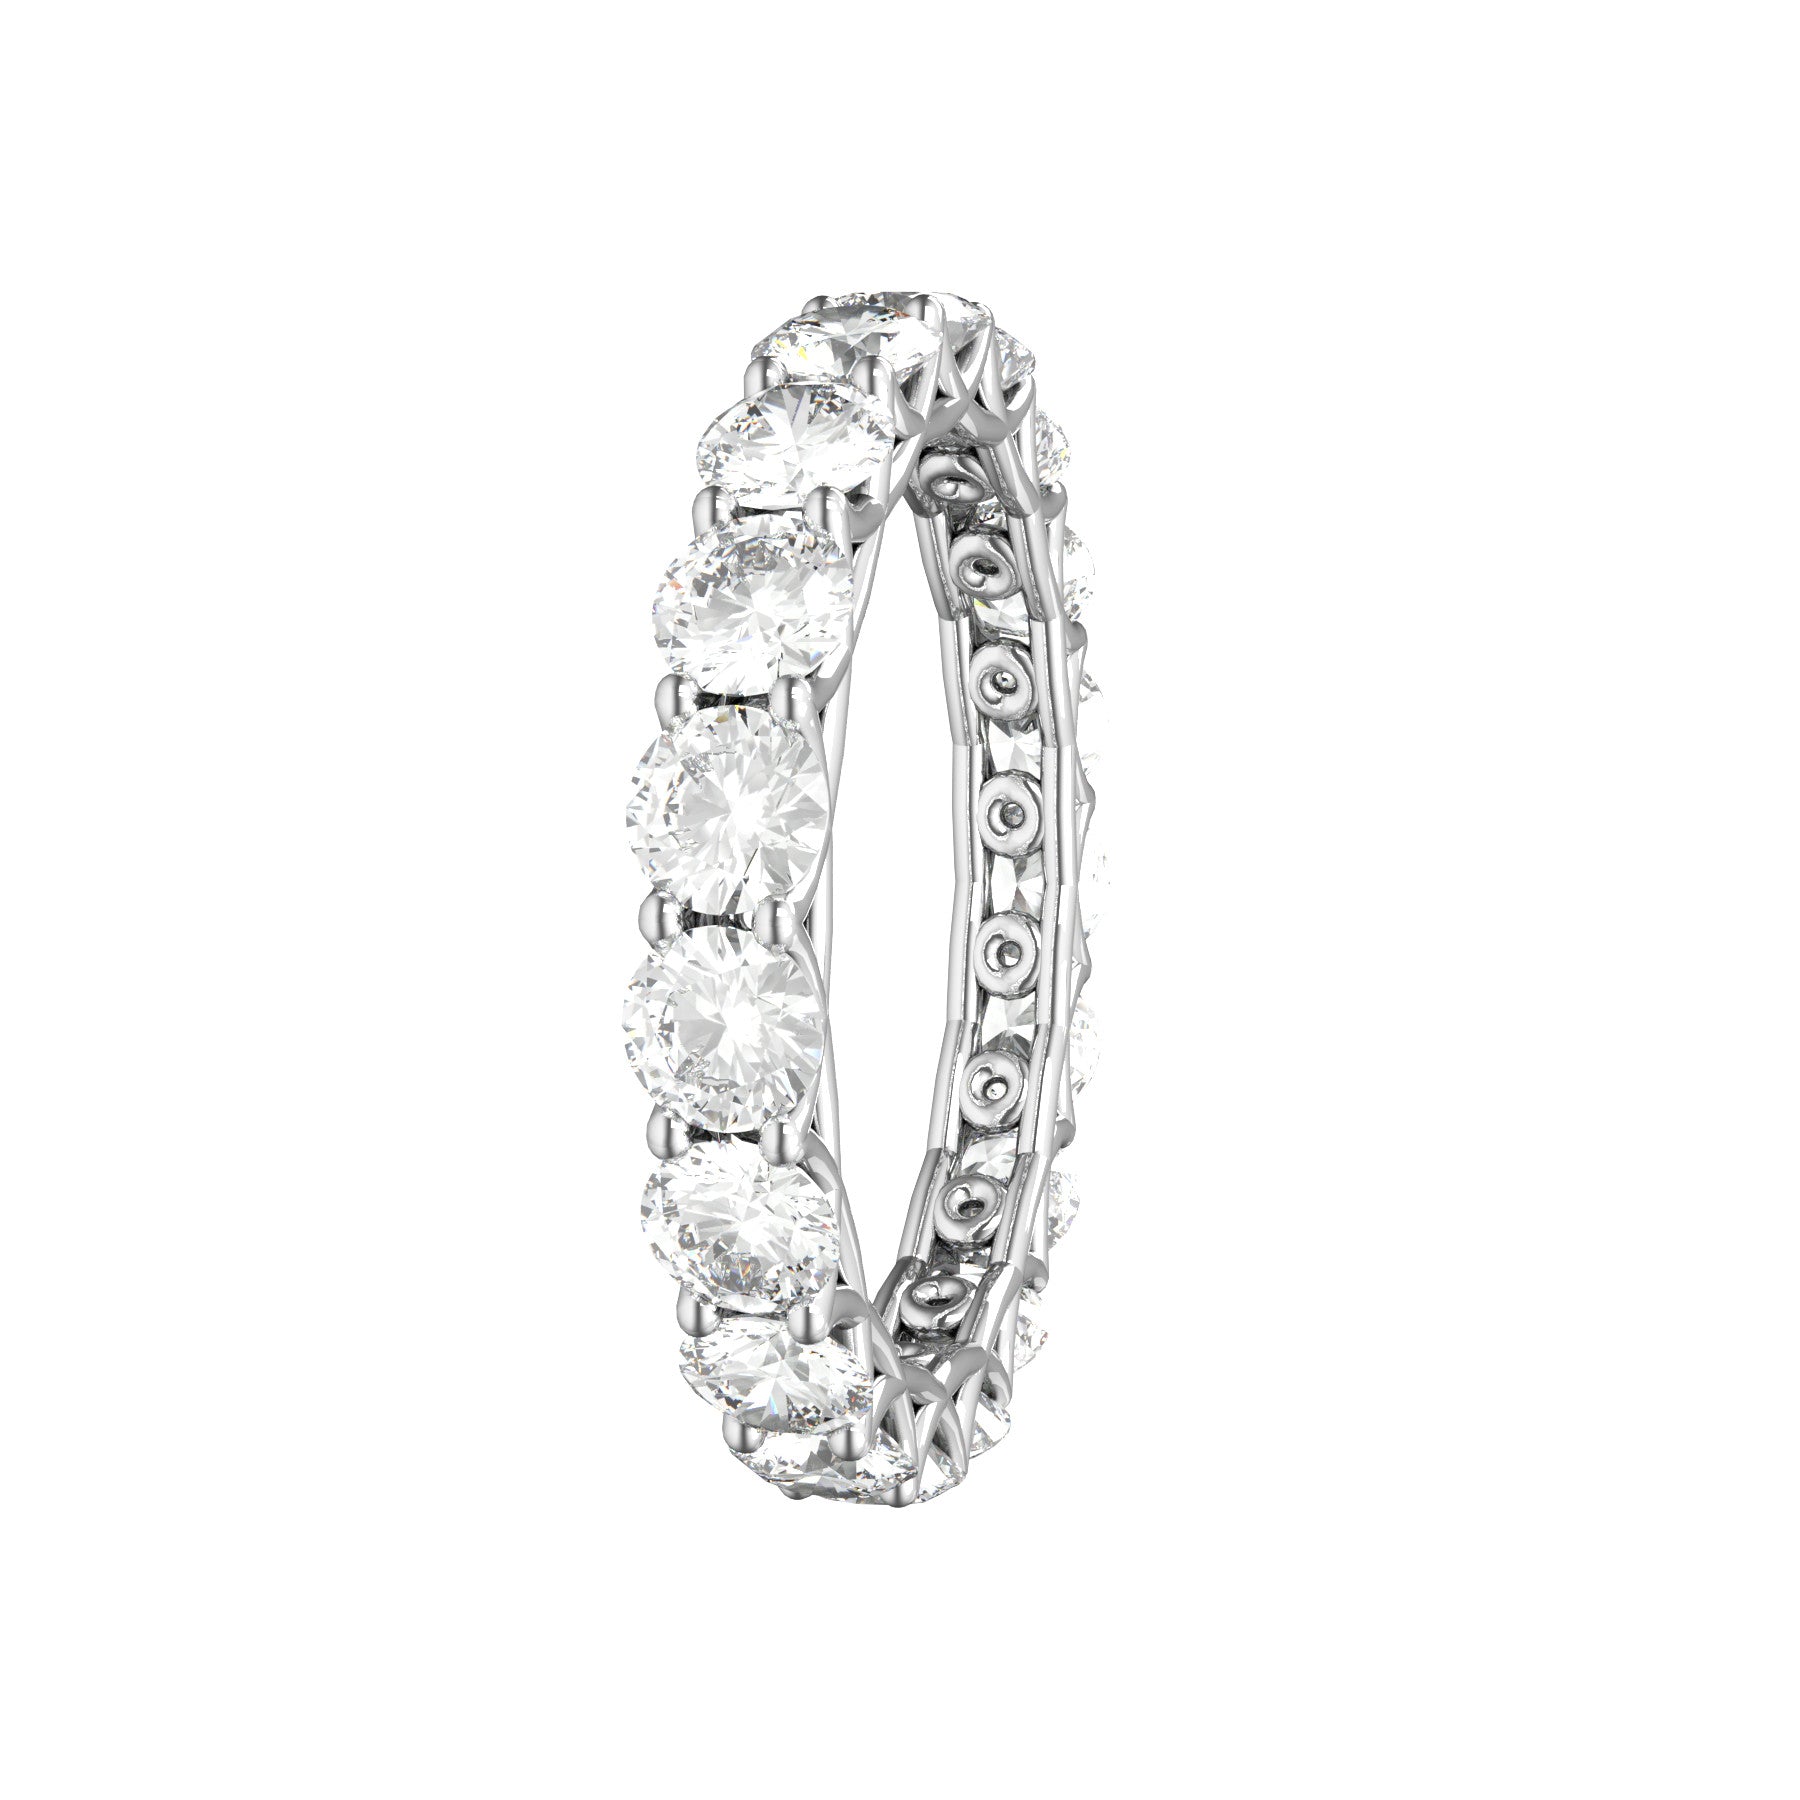 sweet hearts wedding band, 18 K white gold, 0,13 natural diamonds, weight about 1,90 g. (0.07 oz), width 3,25 mm